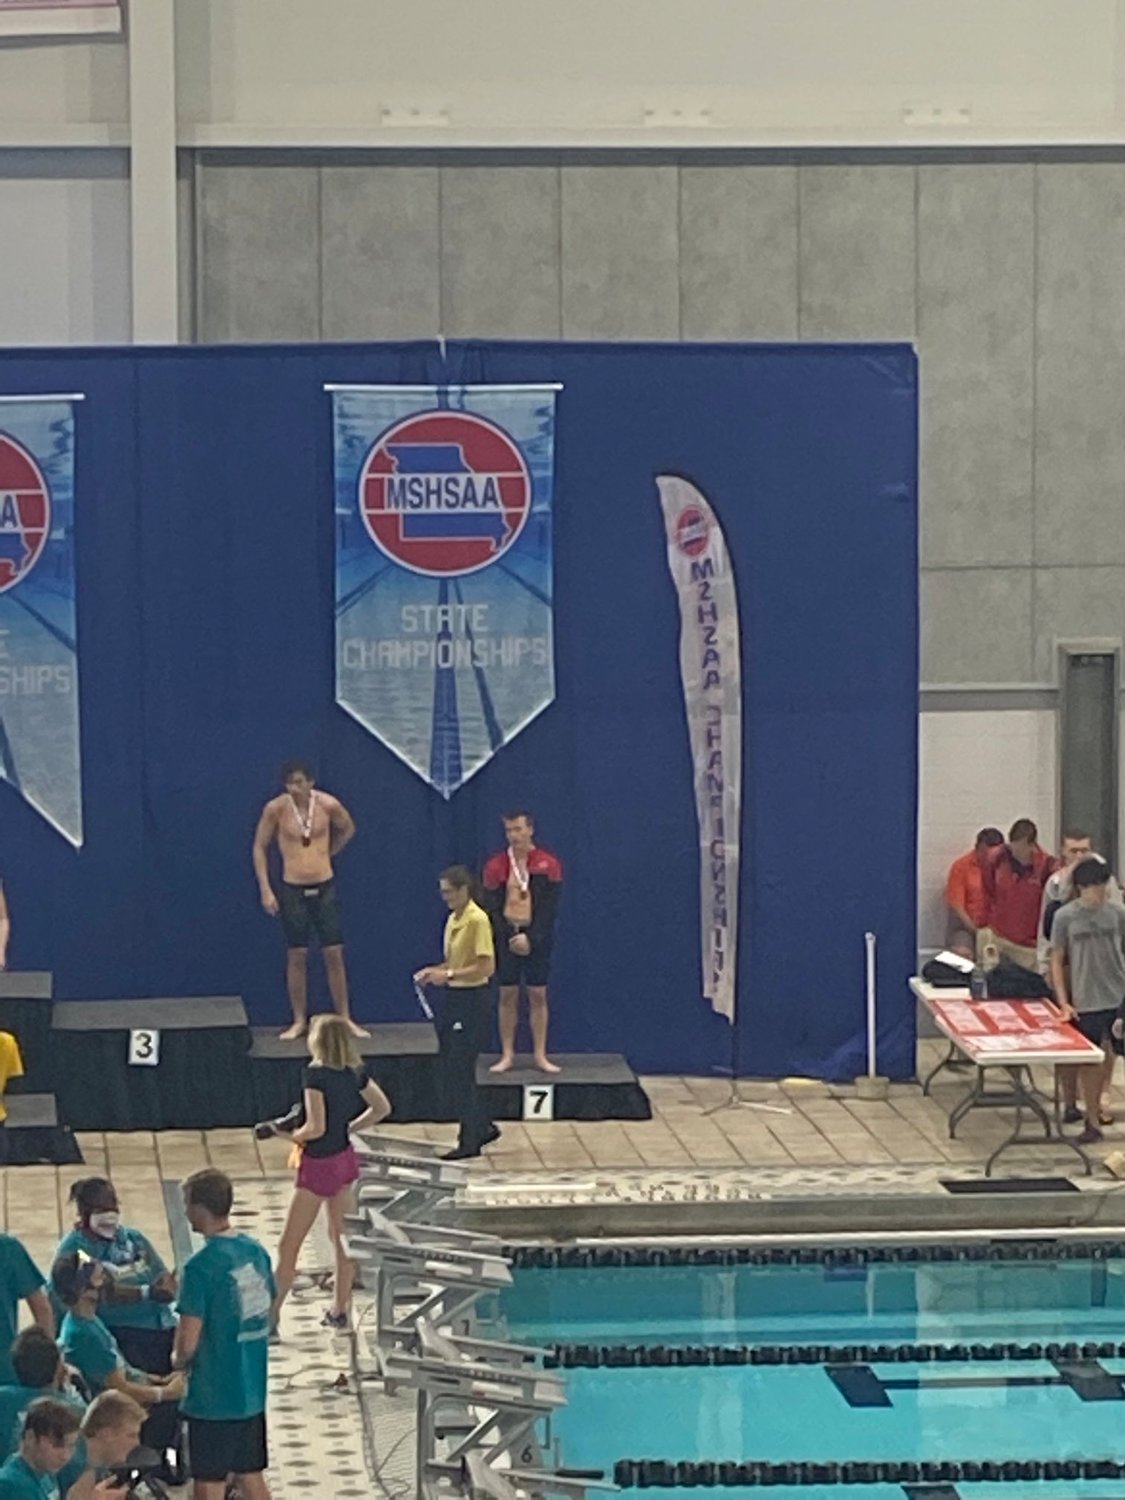 Caden Hendee standing on the 5th place podium. Hendee finished his high school career with two state medals and finished second in the consolation of the 50 yard freestyle with a time of 22.08, earning all state honors.